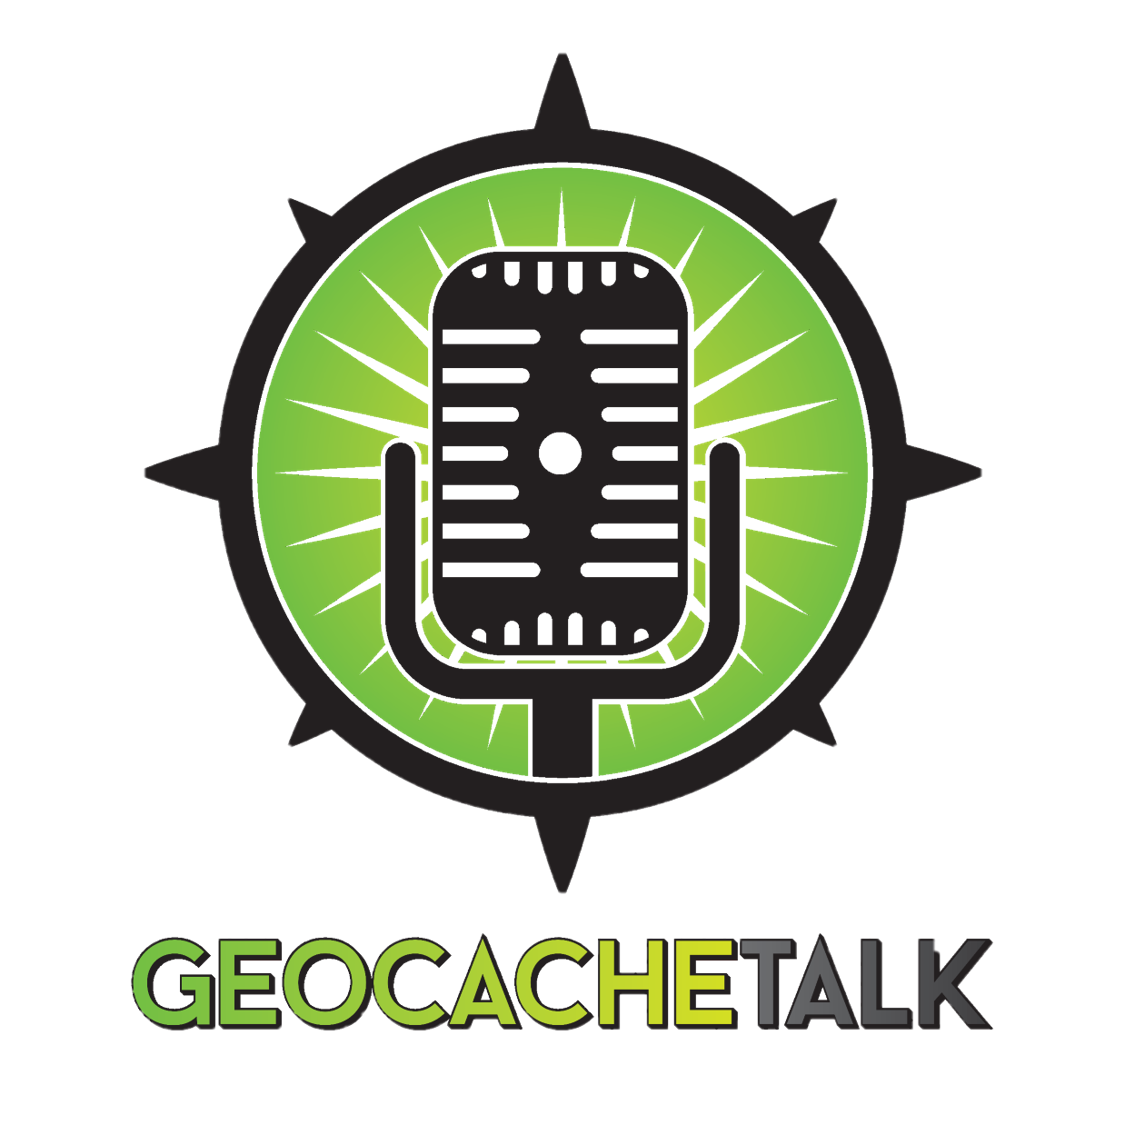 Geocaching Info Cards to accompany Geocoins & Trackables (Lots of